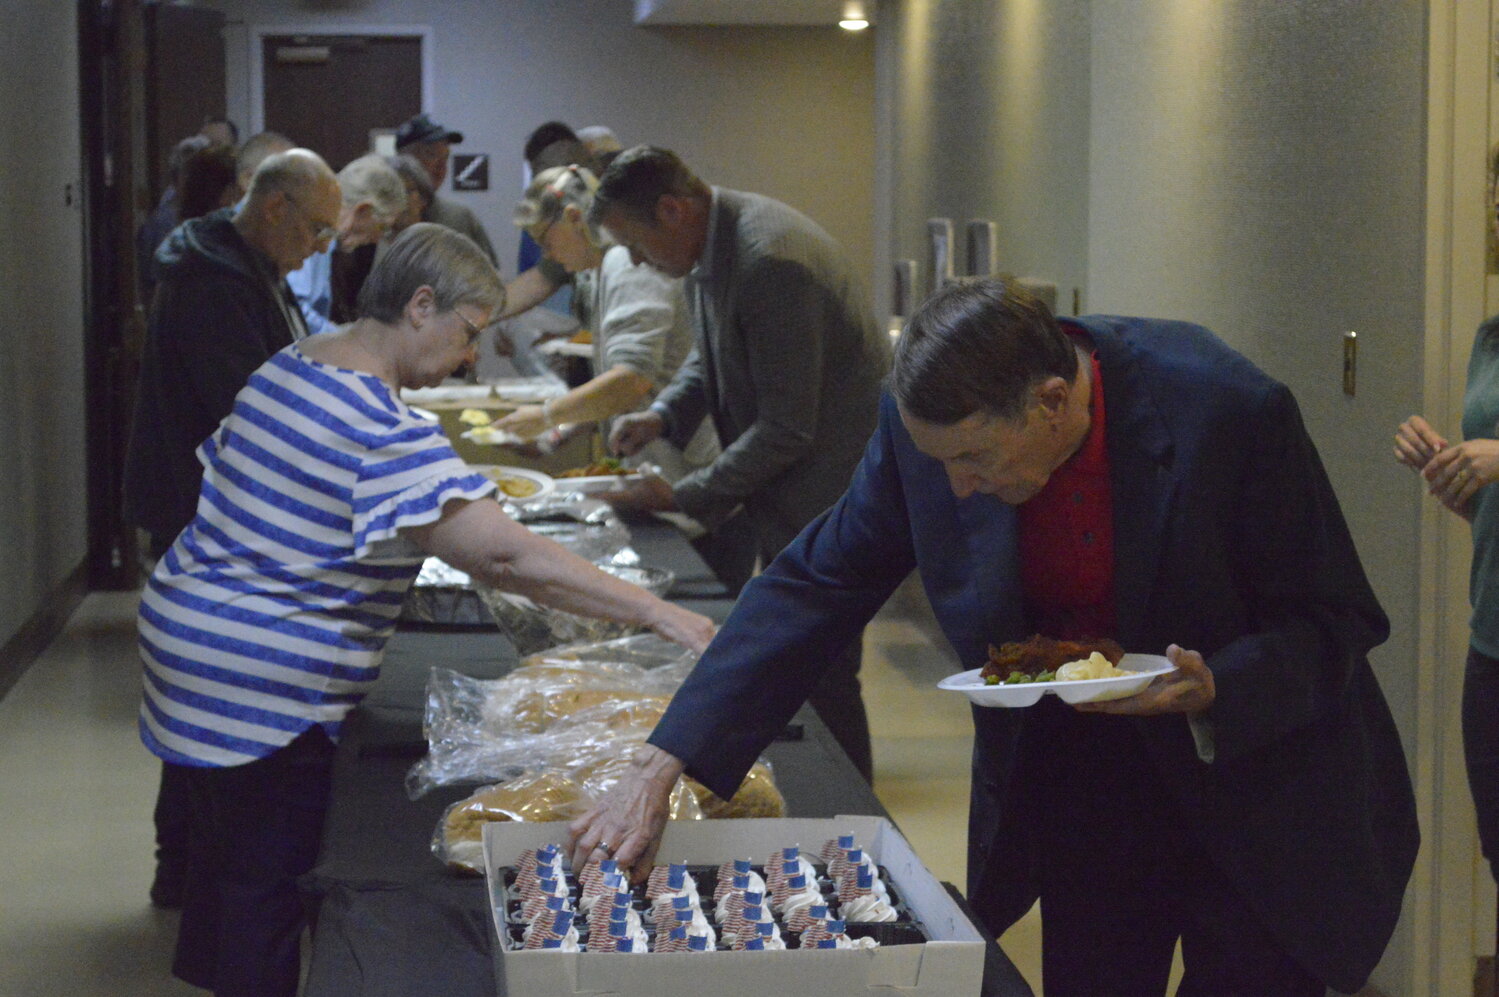 Bert Patrick (right) reaches for a cupcake during the Crawford County Republican Party’s Dinner and Discussion event Saturday, May 20 at Pittsburg’s Memorial Auditorium.